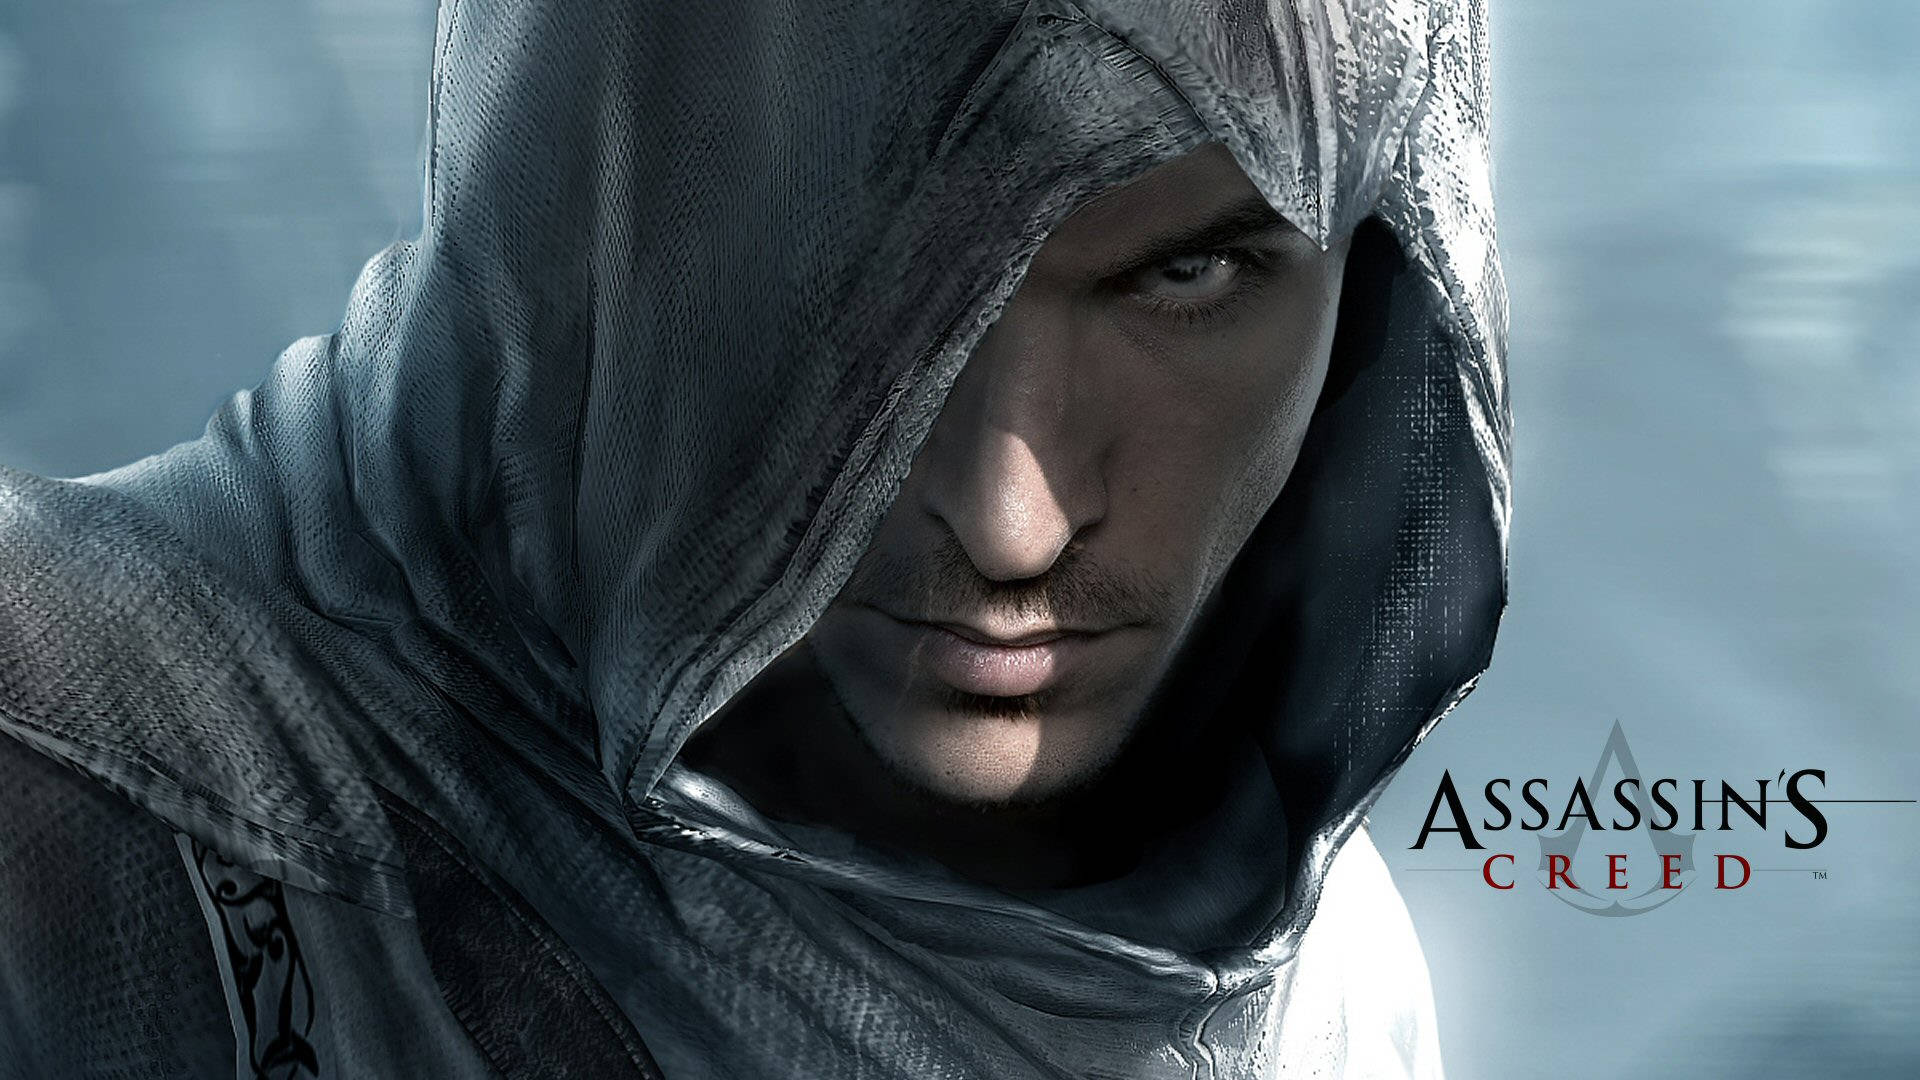 Assassin's Creed Altair Graphics Wallpaper